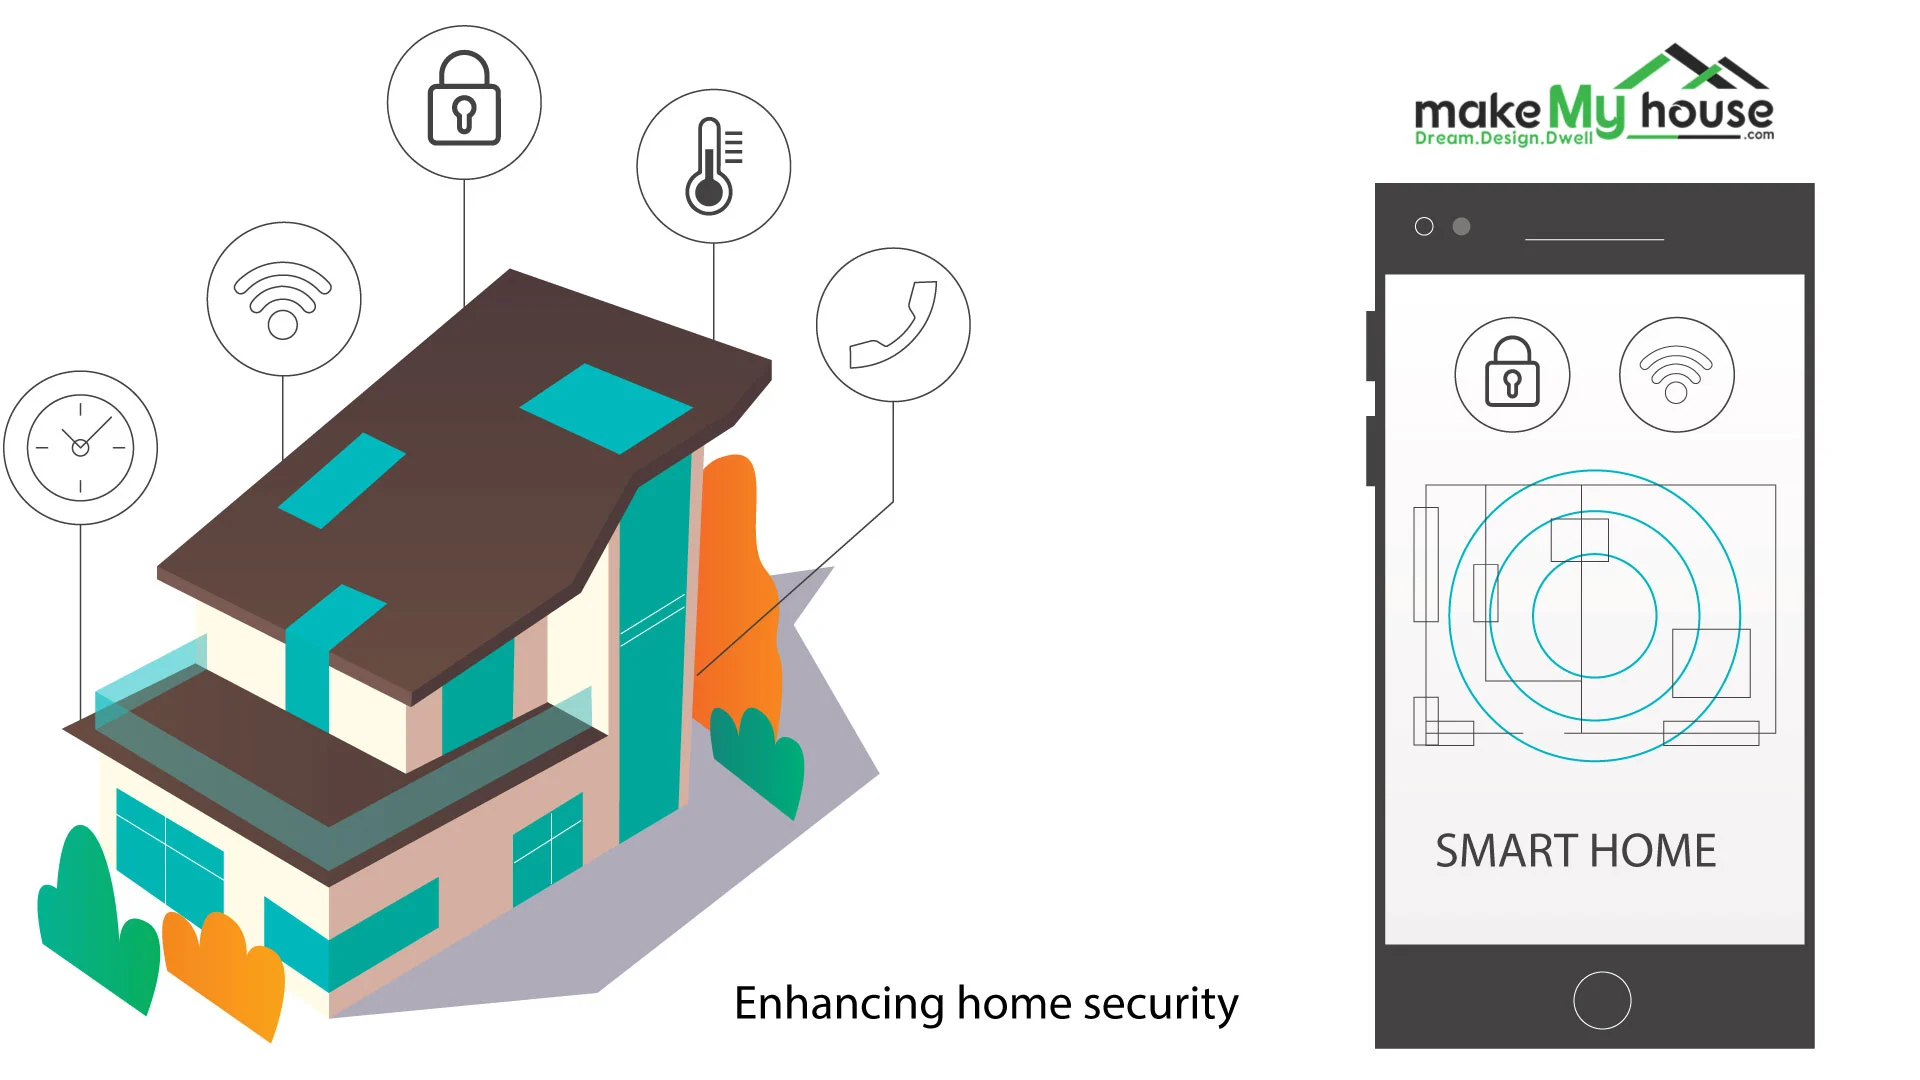 Smart home technology can also play a significant role in enhancing home security. This includes the use of cameras, motion sensors, and smart locks that can be controlled remotely.